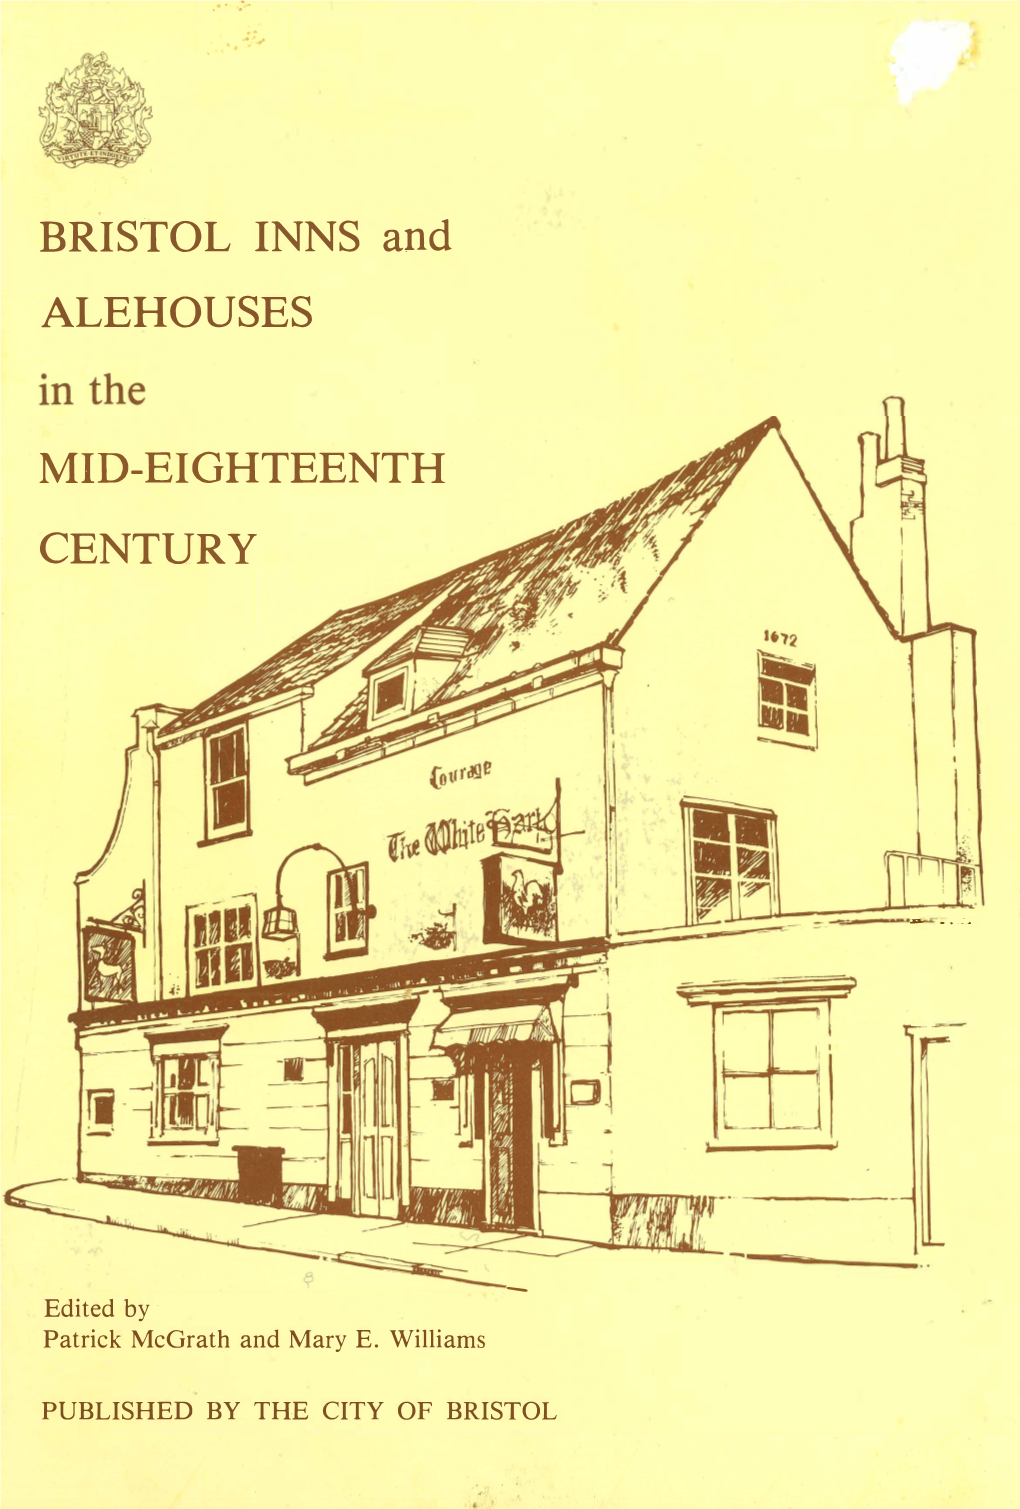 BRISTOL INNS and ALEHOUSES in the MID-EIGHTEENTH CENTURY